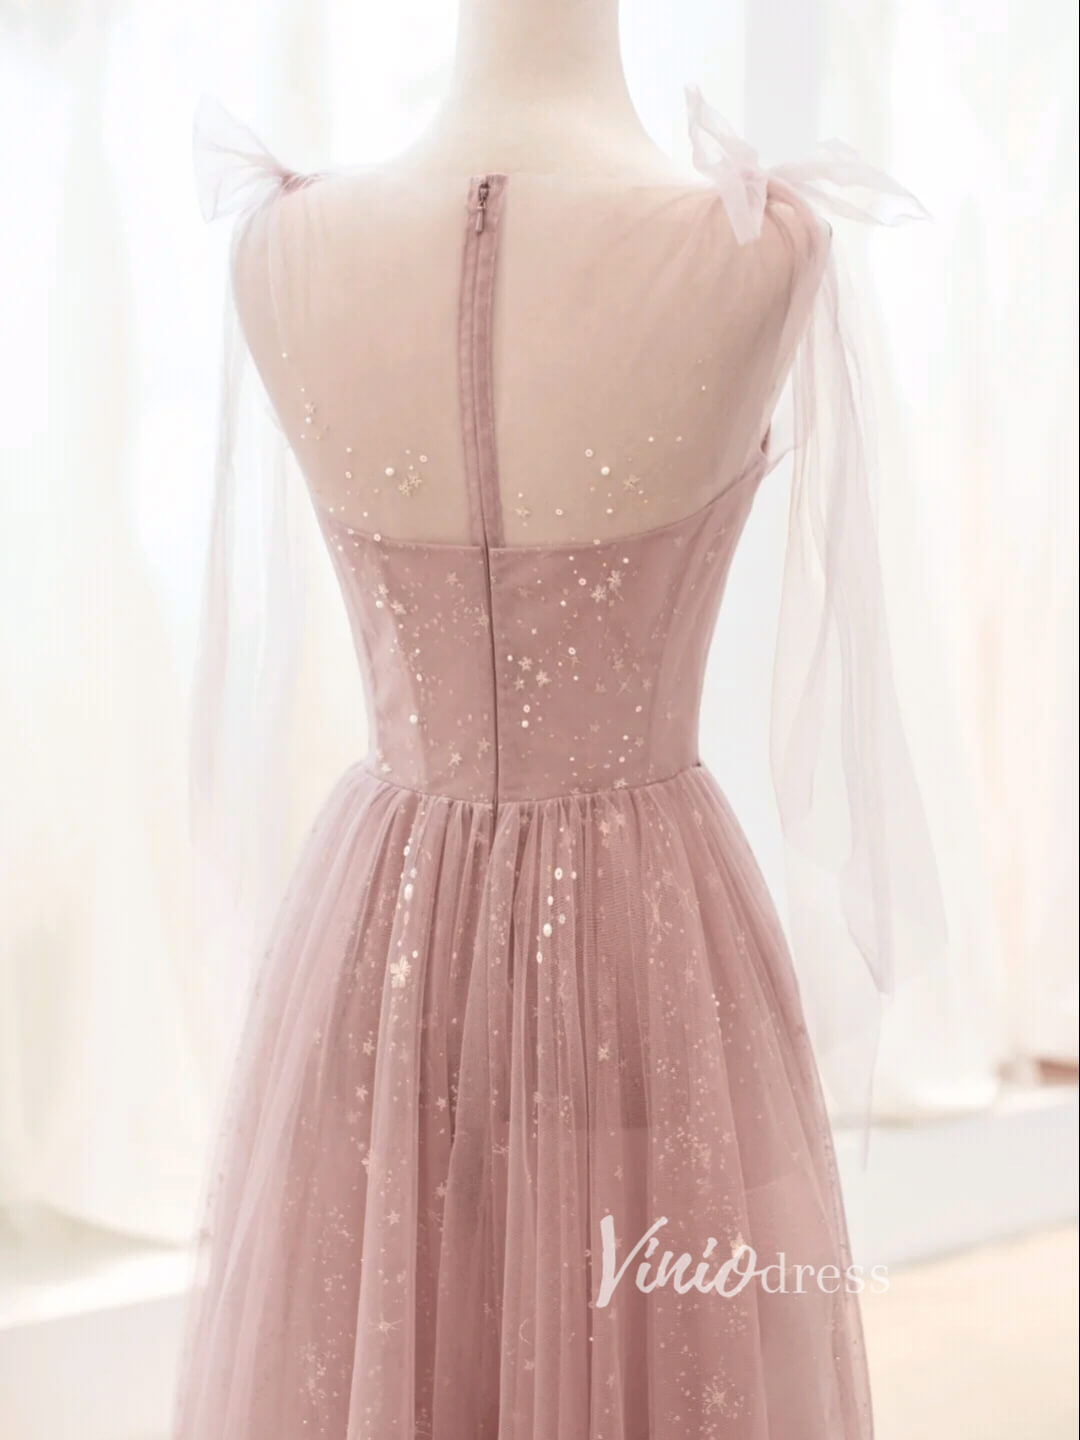 Dusty Rose Pink Starry Tulle Prom Dresses A-line Evening Dress FD3426-prom dresses-Viniodress-Viniodress